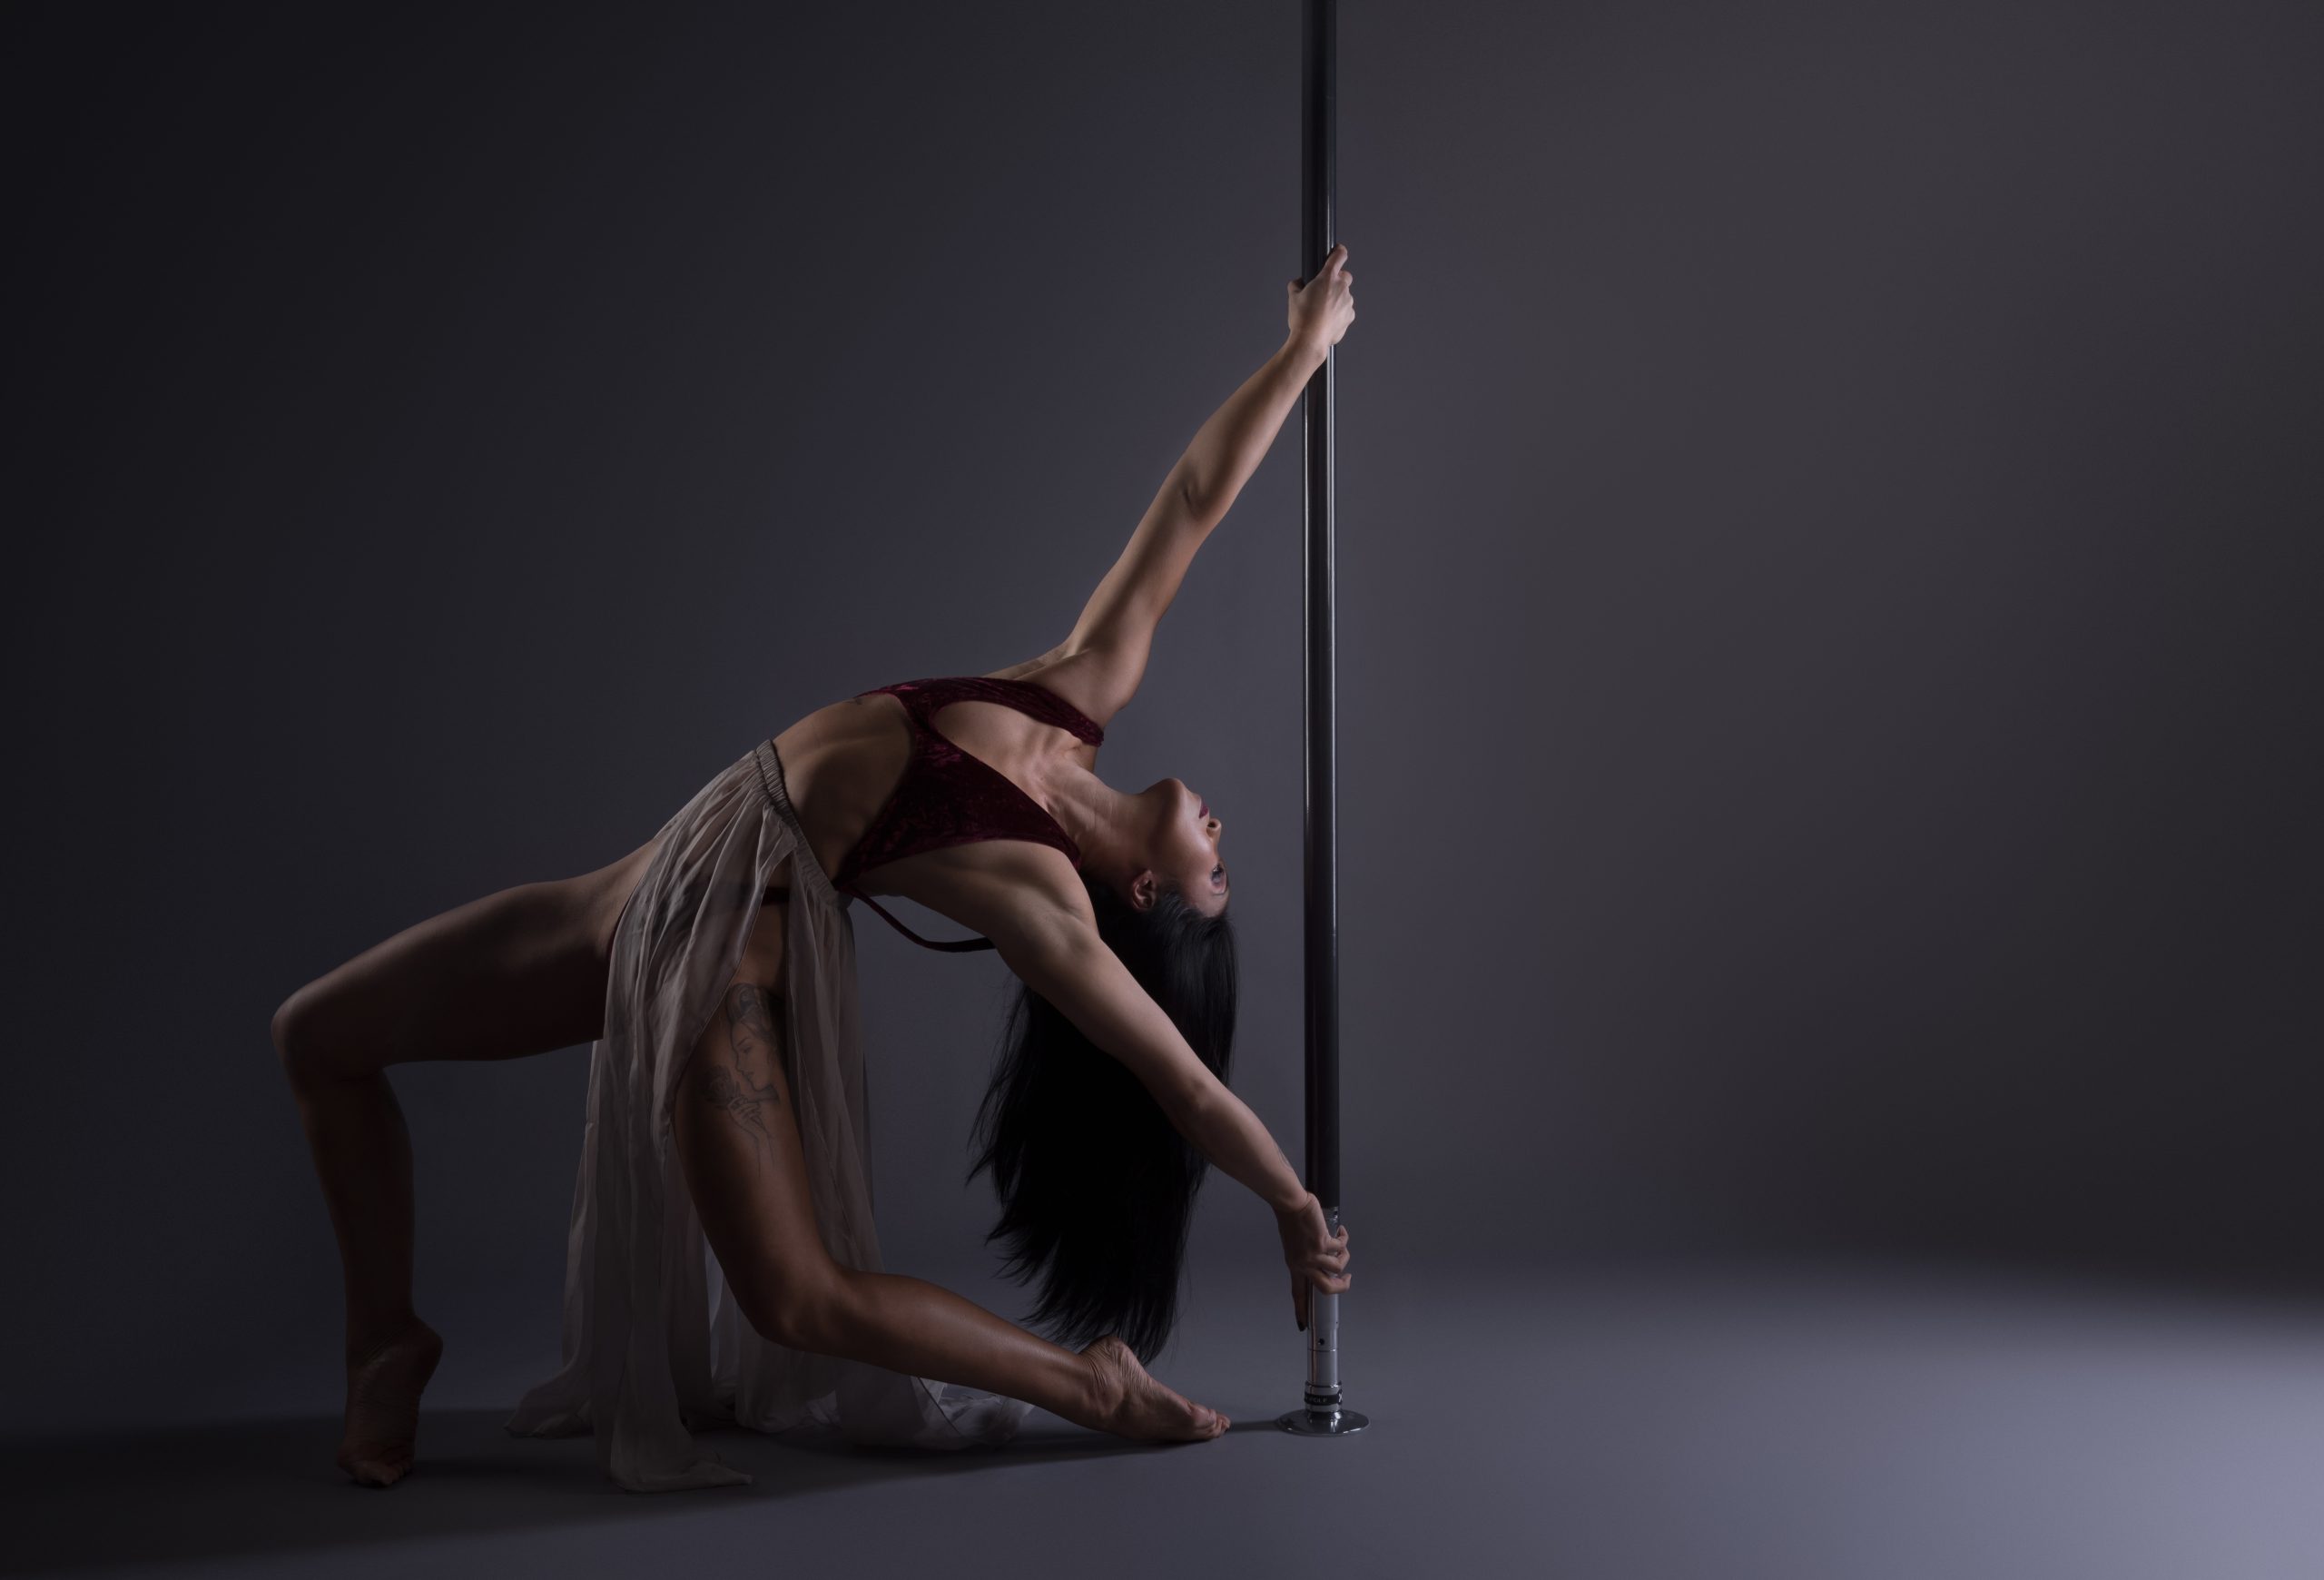 Meet Kathy, The Lawyer Who Moved To Cape Town To Pole Dance